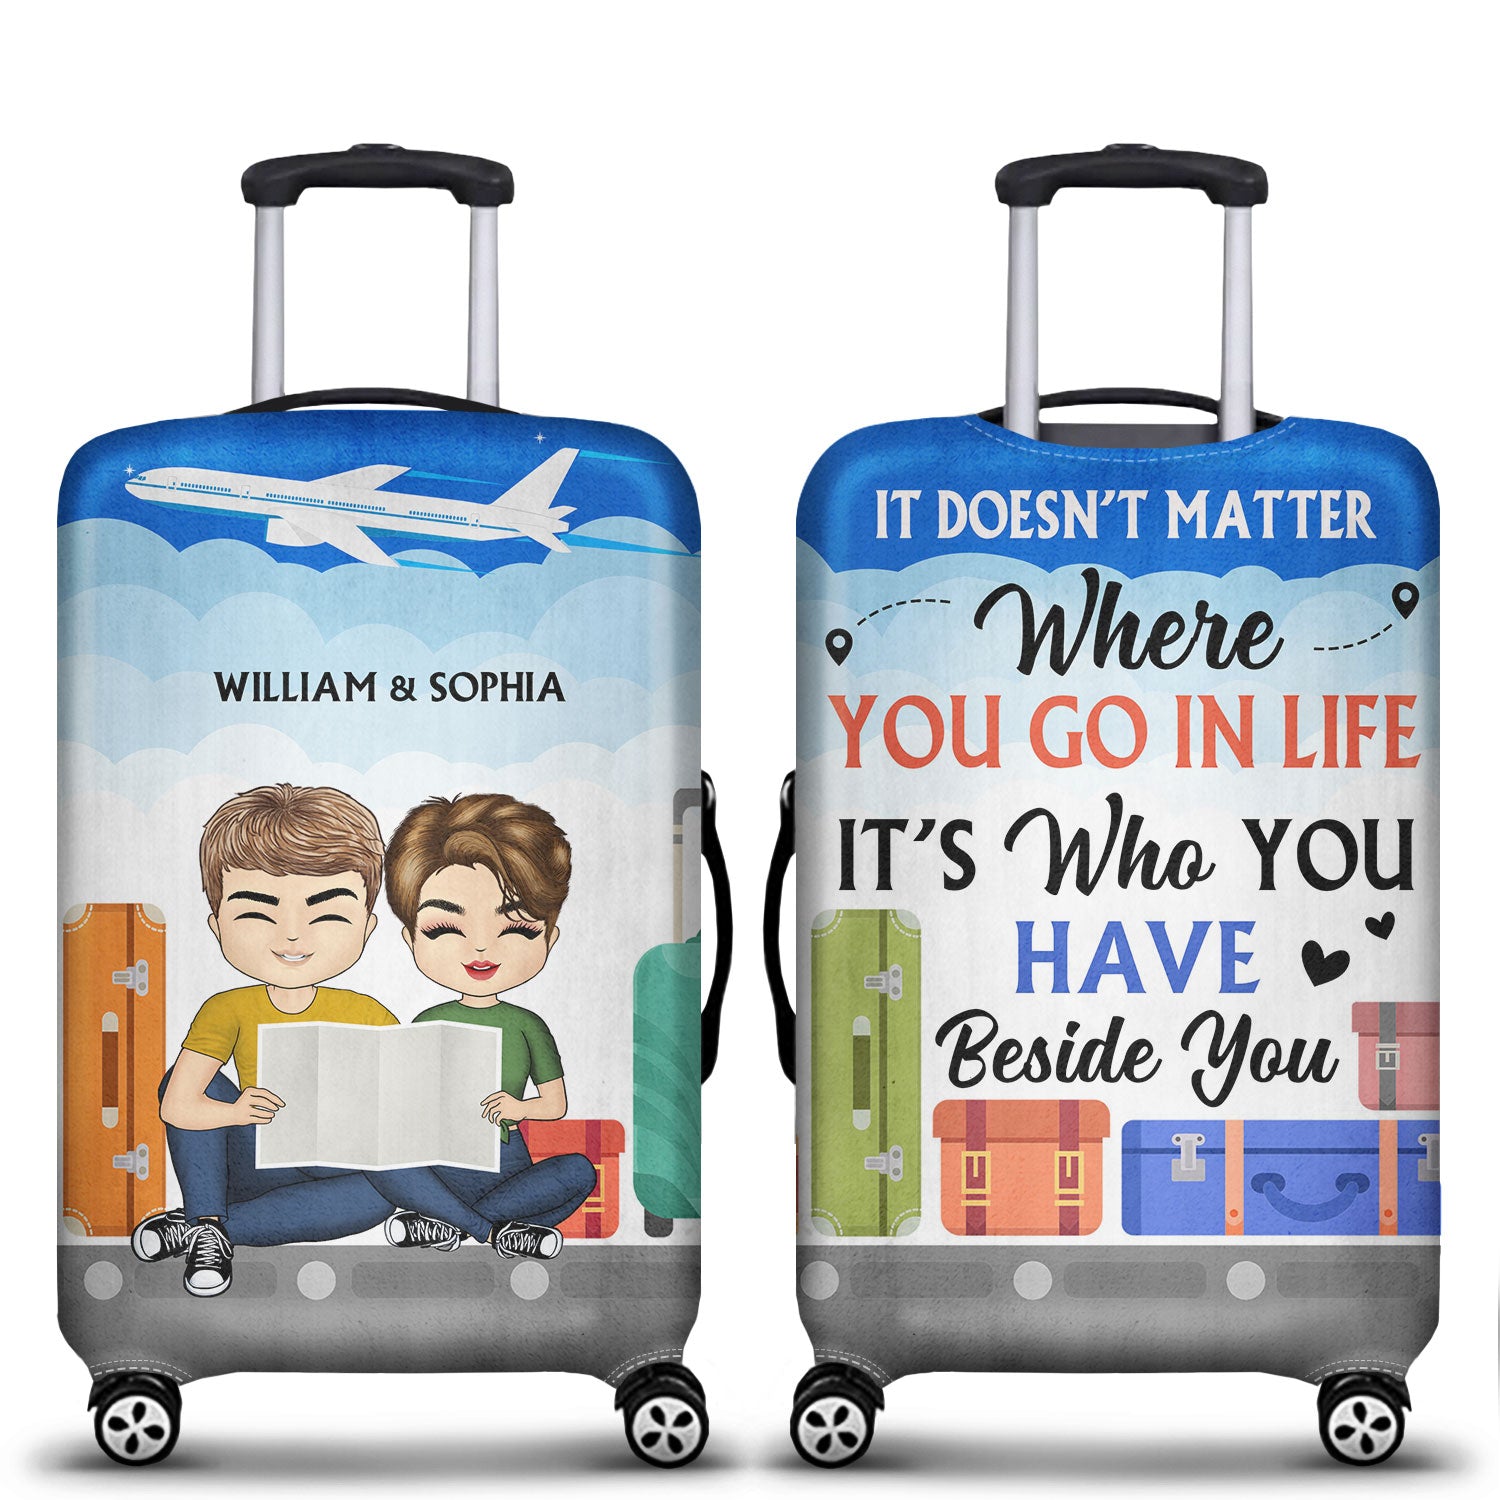 It's Who You Have Beside You - Gift For Couples - Personalized Custom Luggage Cover